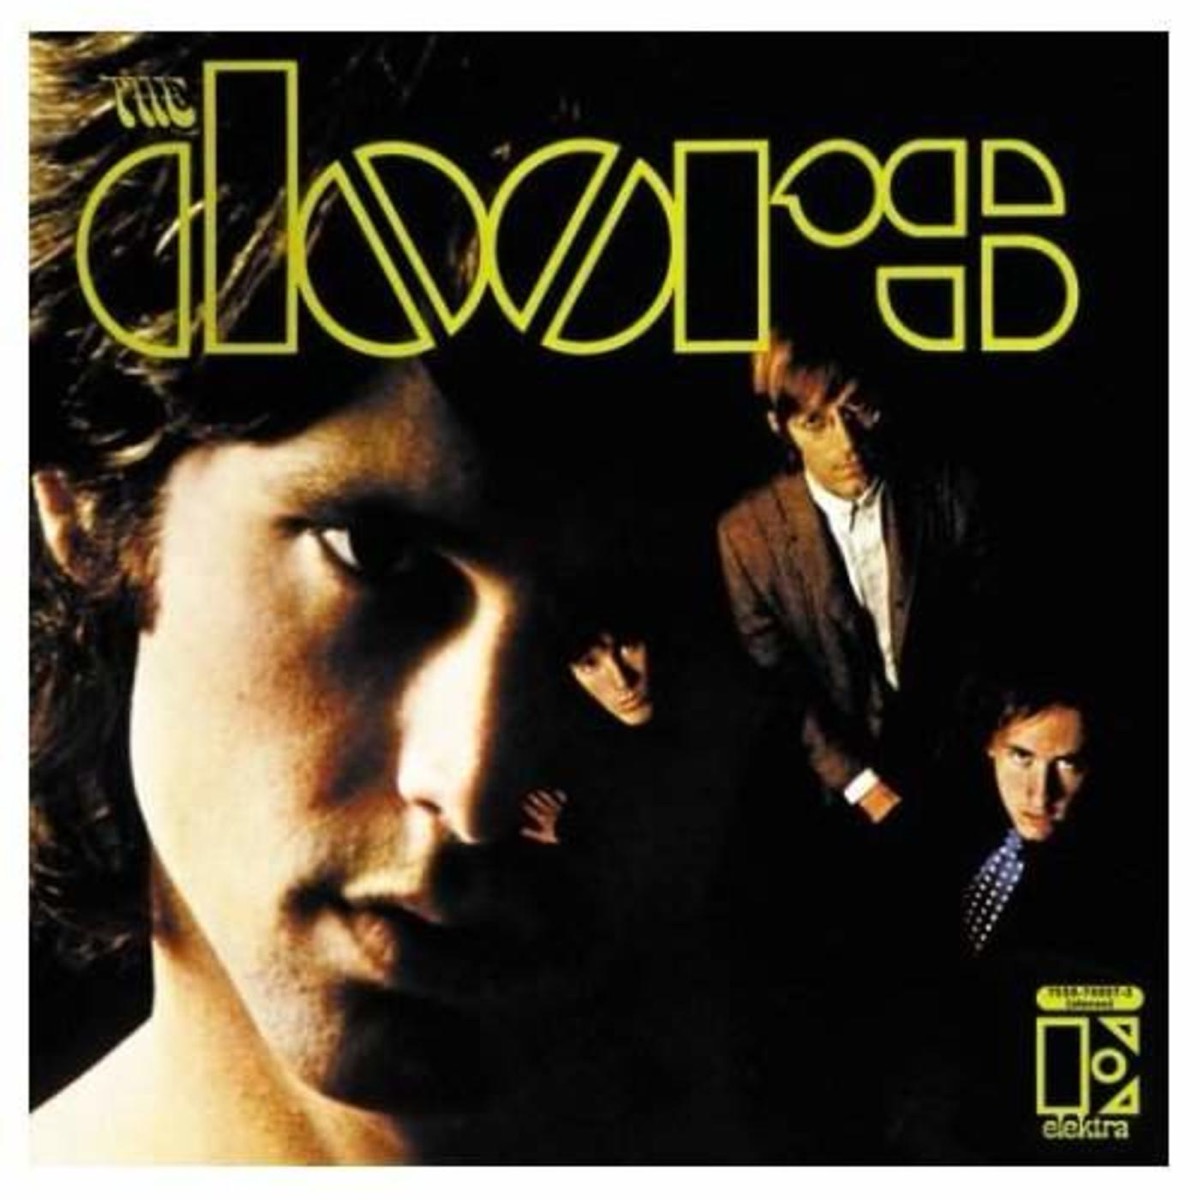 The Doors self-titled album cover